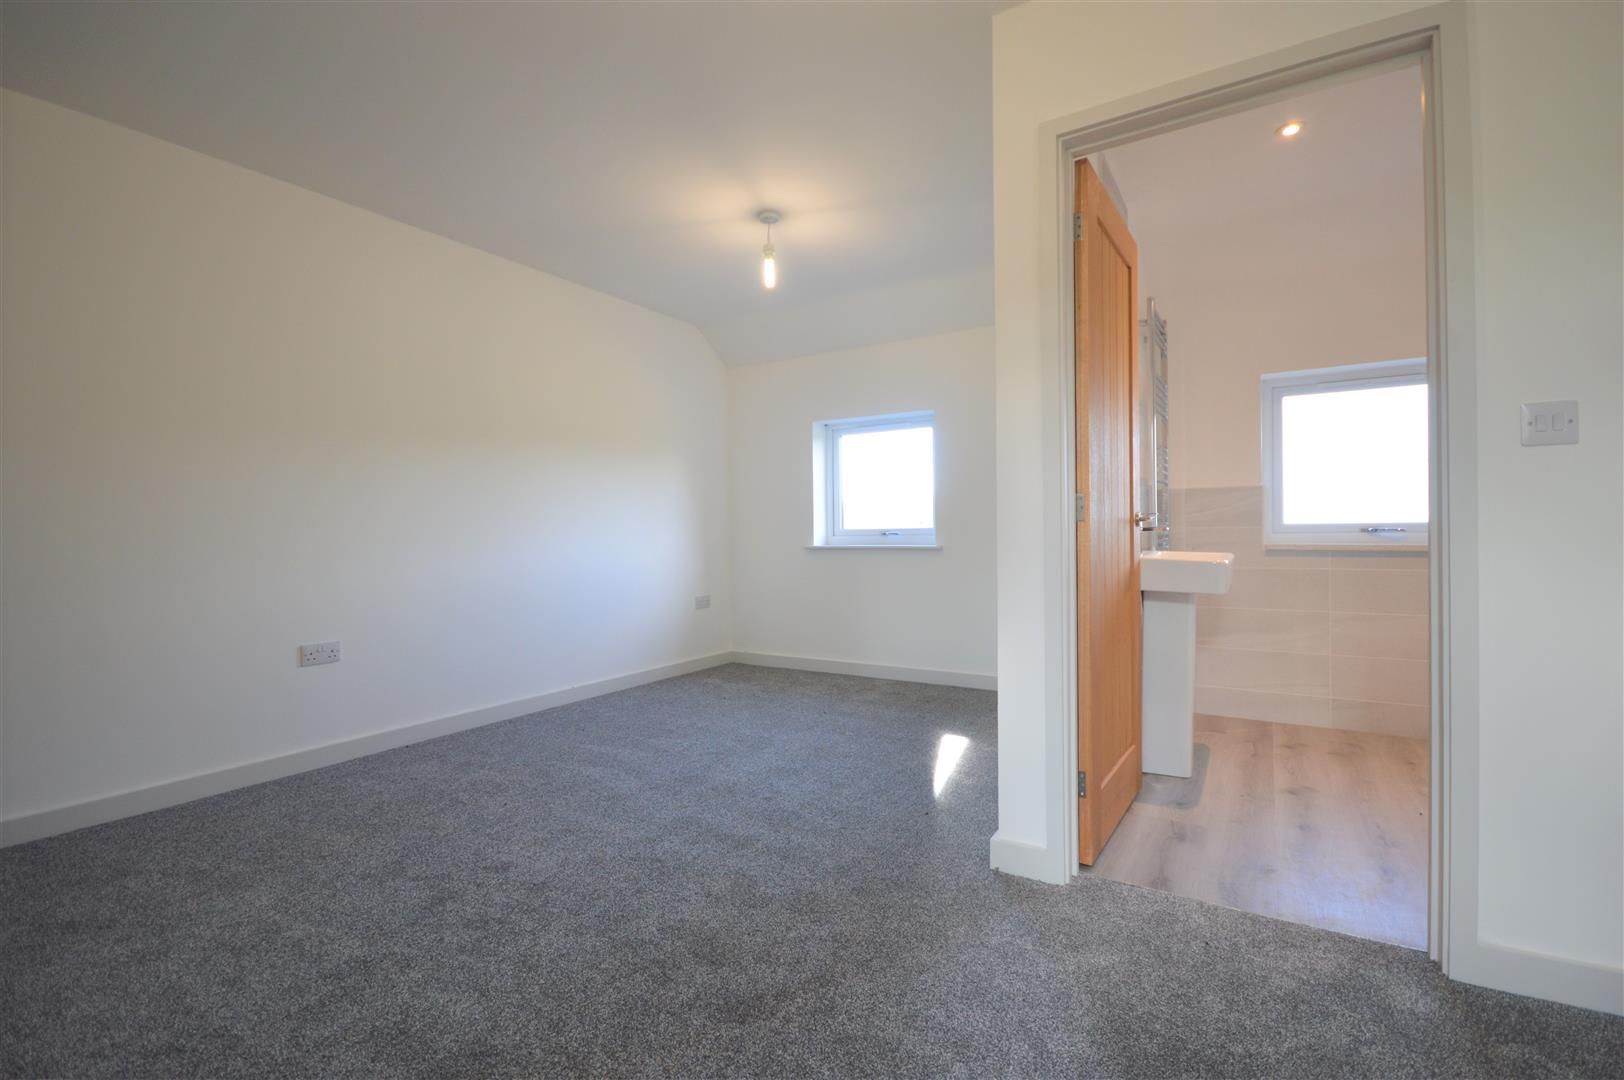 3 bed terraced for sale in Leominster 7